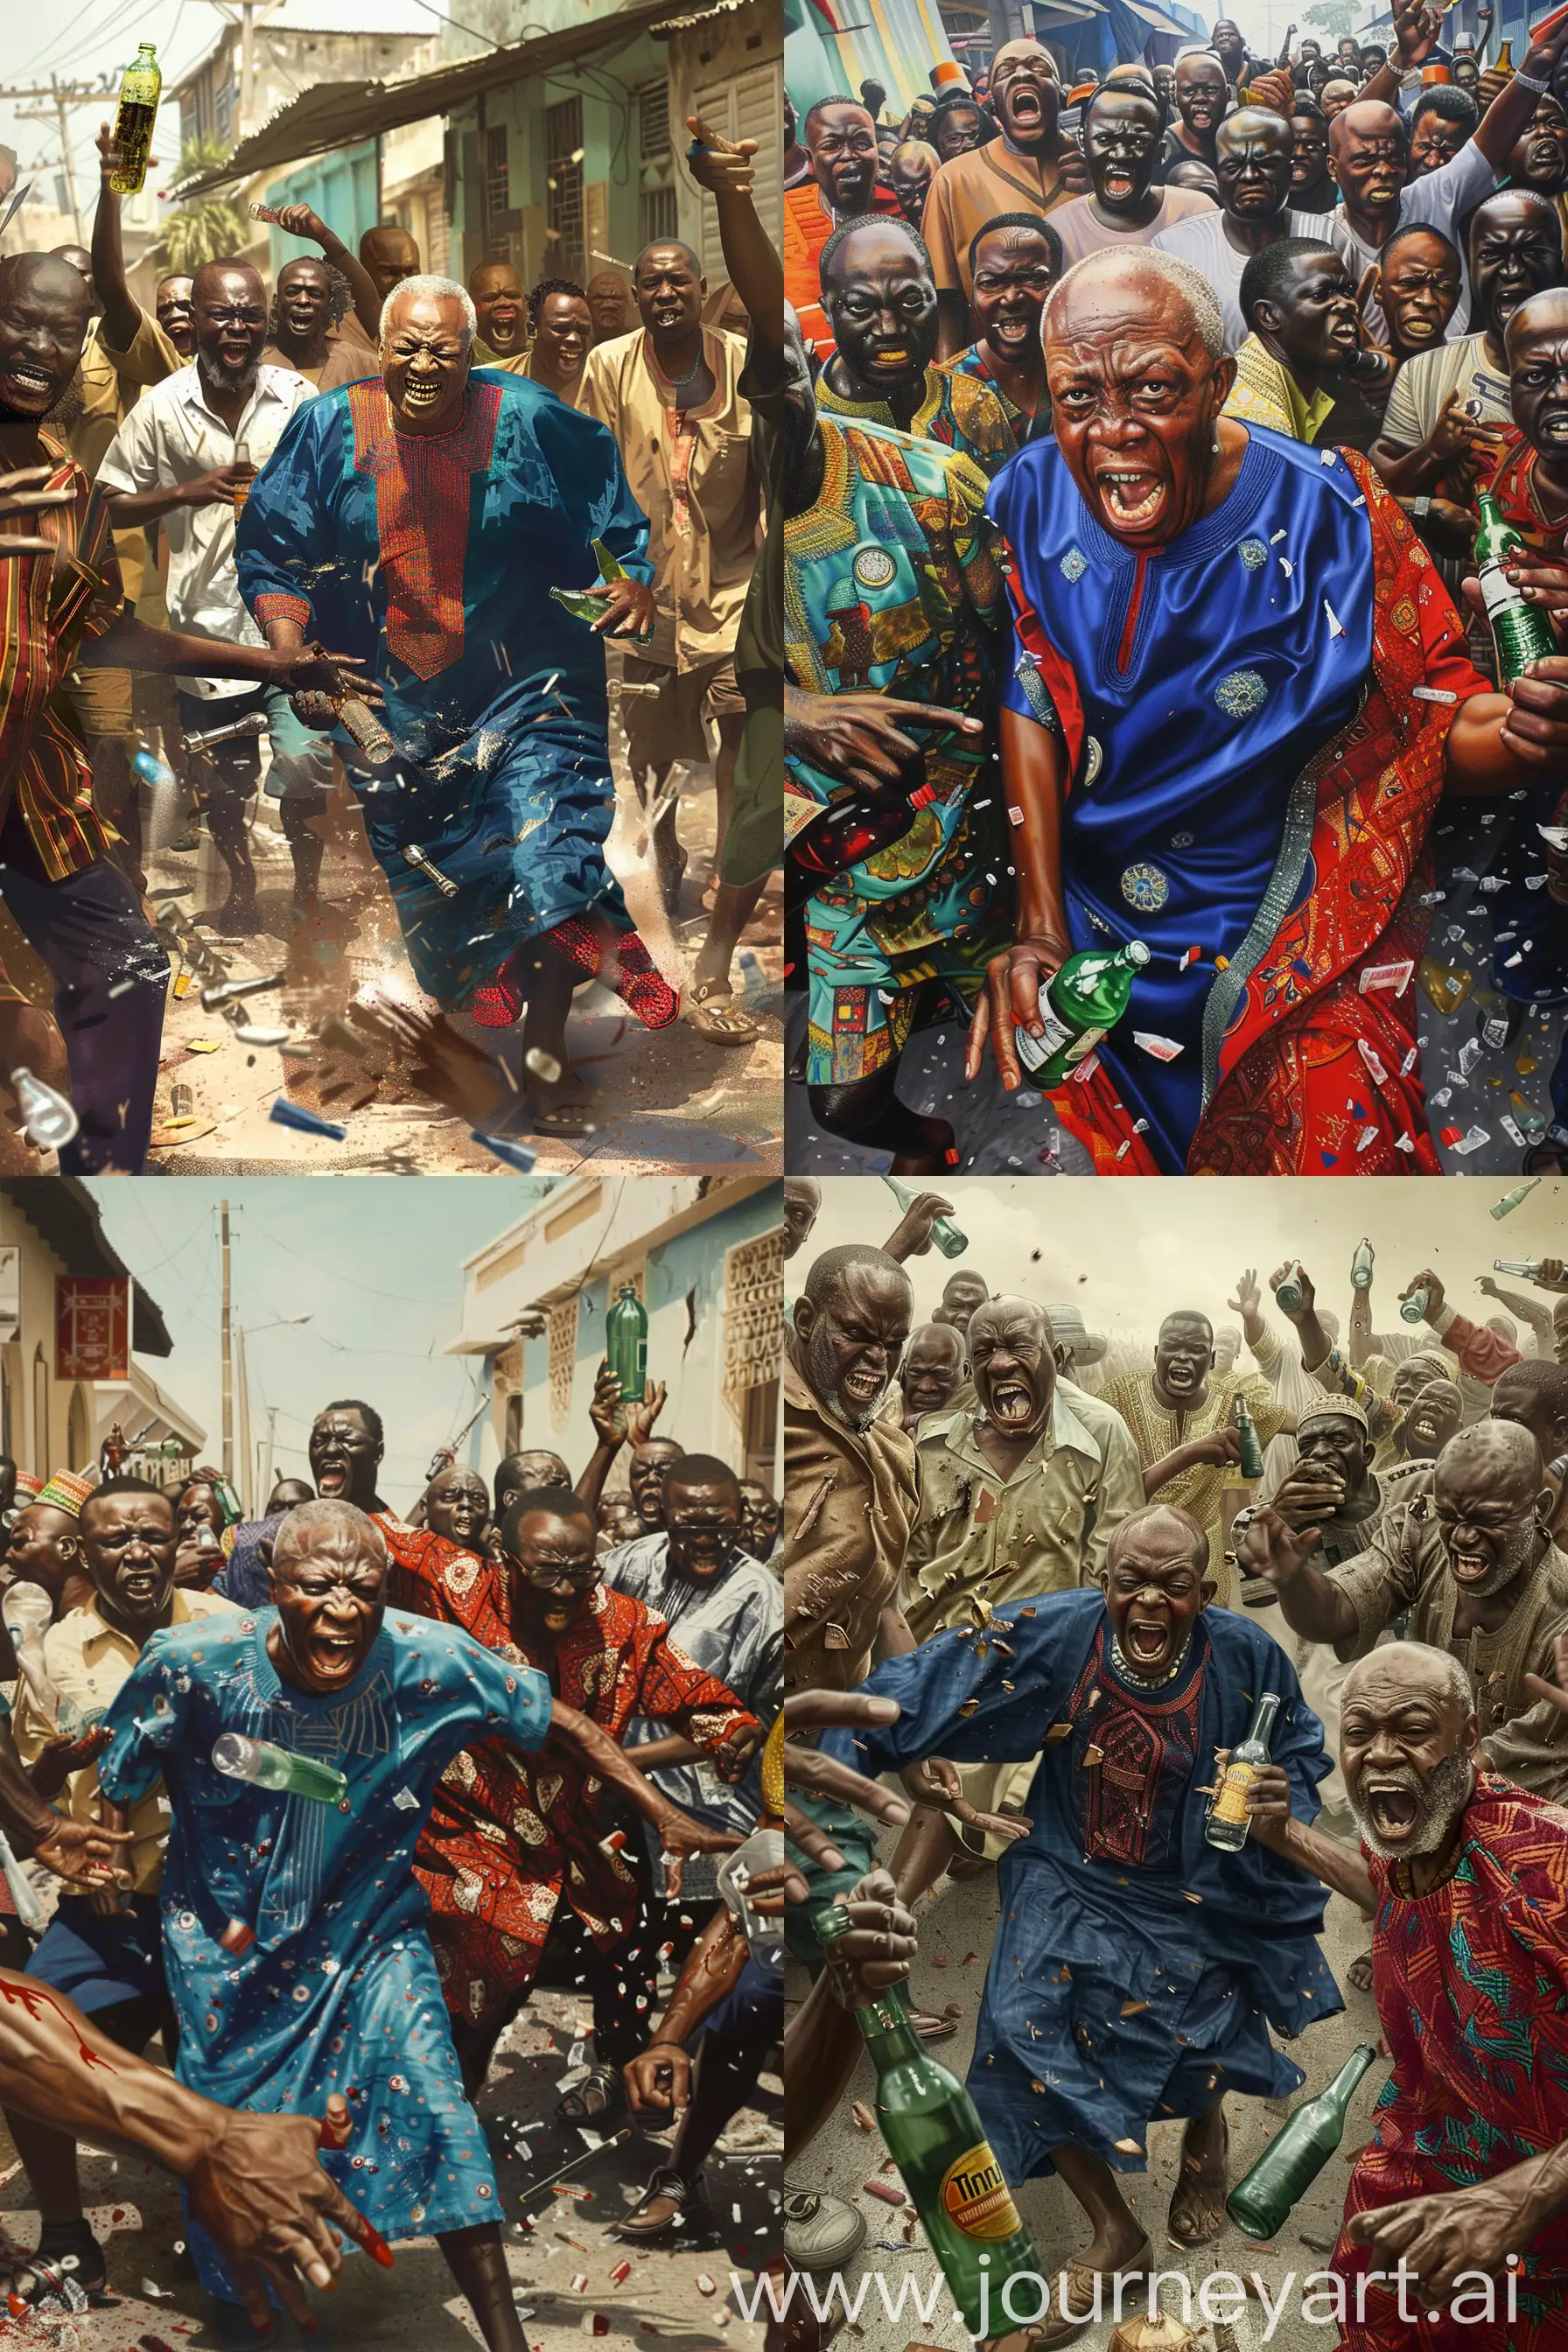 Scared-President-Tinubu-Chased-by-Angry-Nigerian-Thugs-in-Blue-and-Red-Kaftan